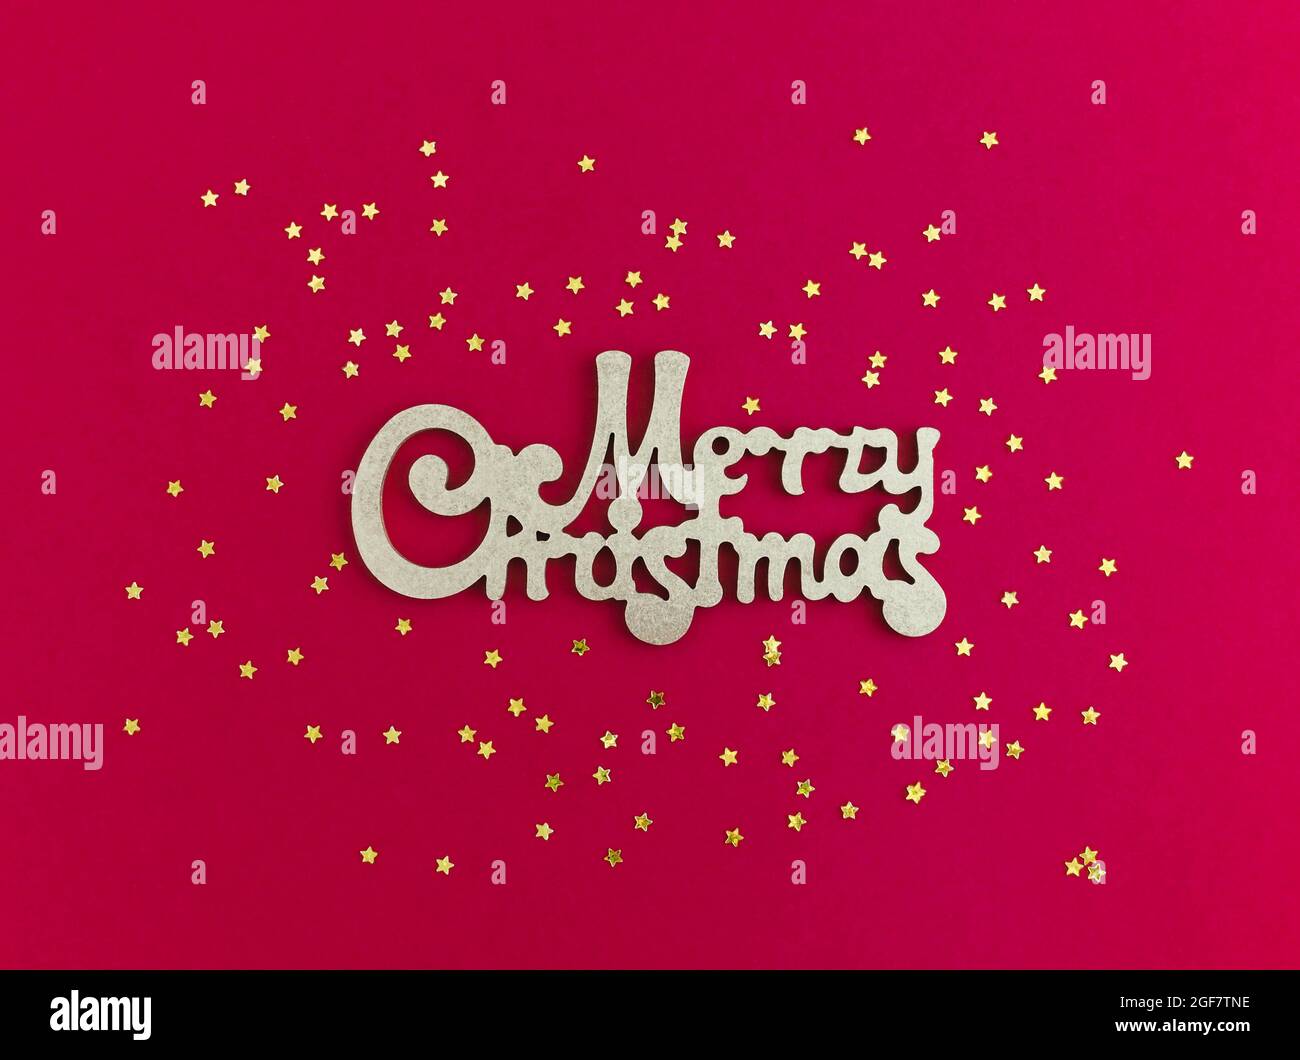 Merry Christmas gold greeting message and golden stars confetti on red background. Top view. Bright Christmas greeting card. Stock Photo